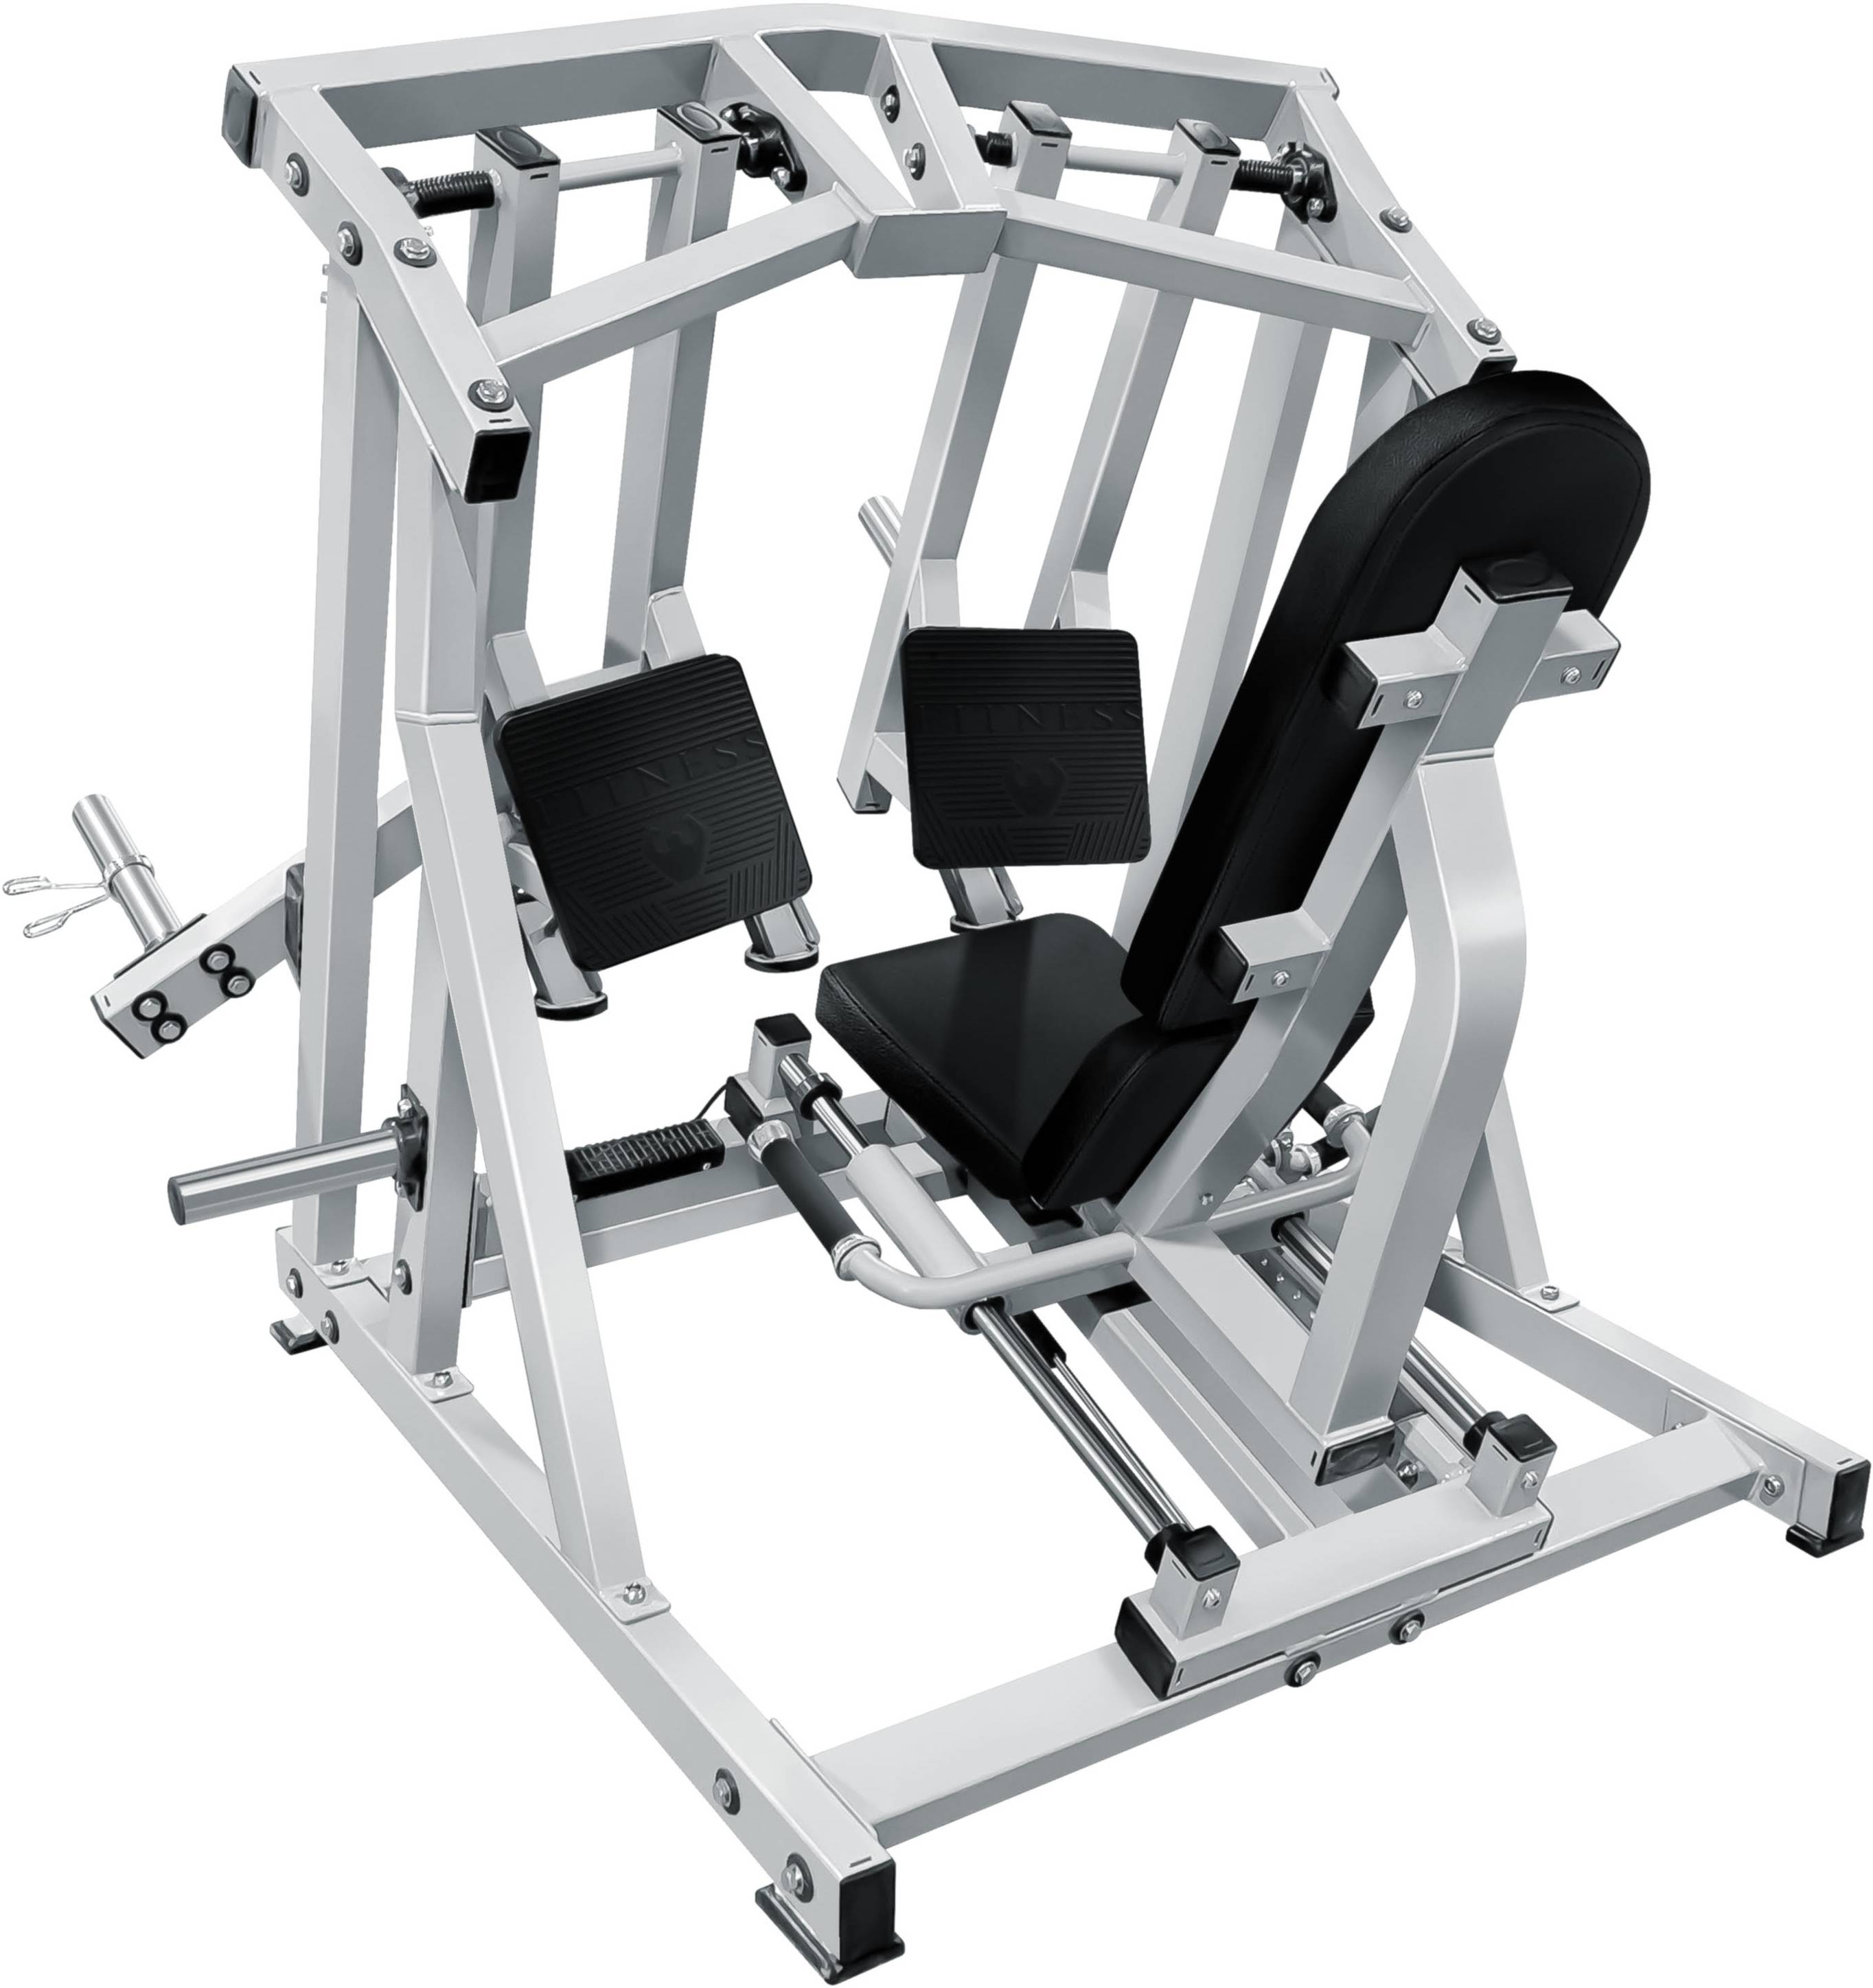 Premium Leg Press Machines for Your Home Gym  French Fitness Napa P/L  Iso-Lateral Horizontal Leg Press & More at Fitness Superstore